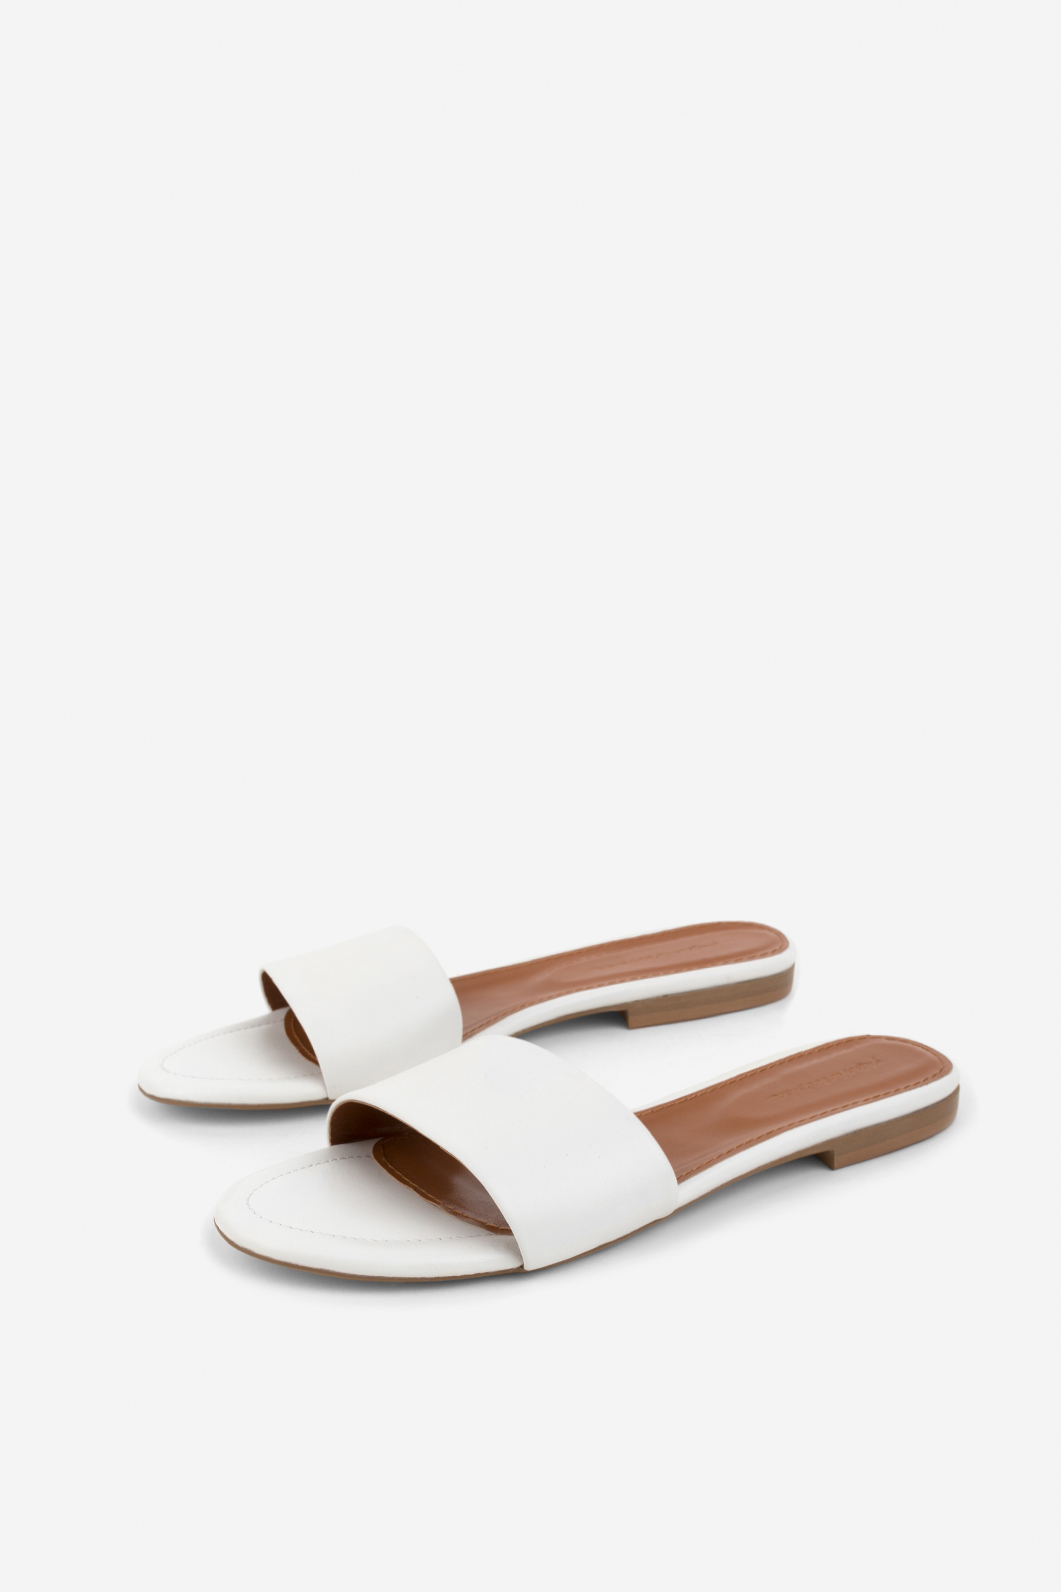 Reese white leather
sandals